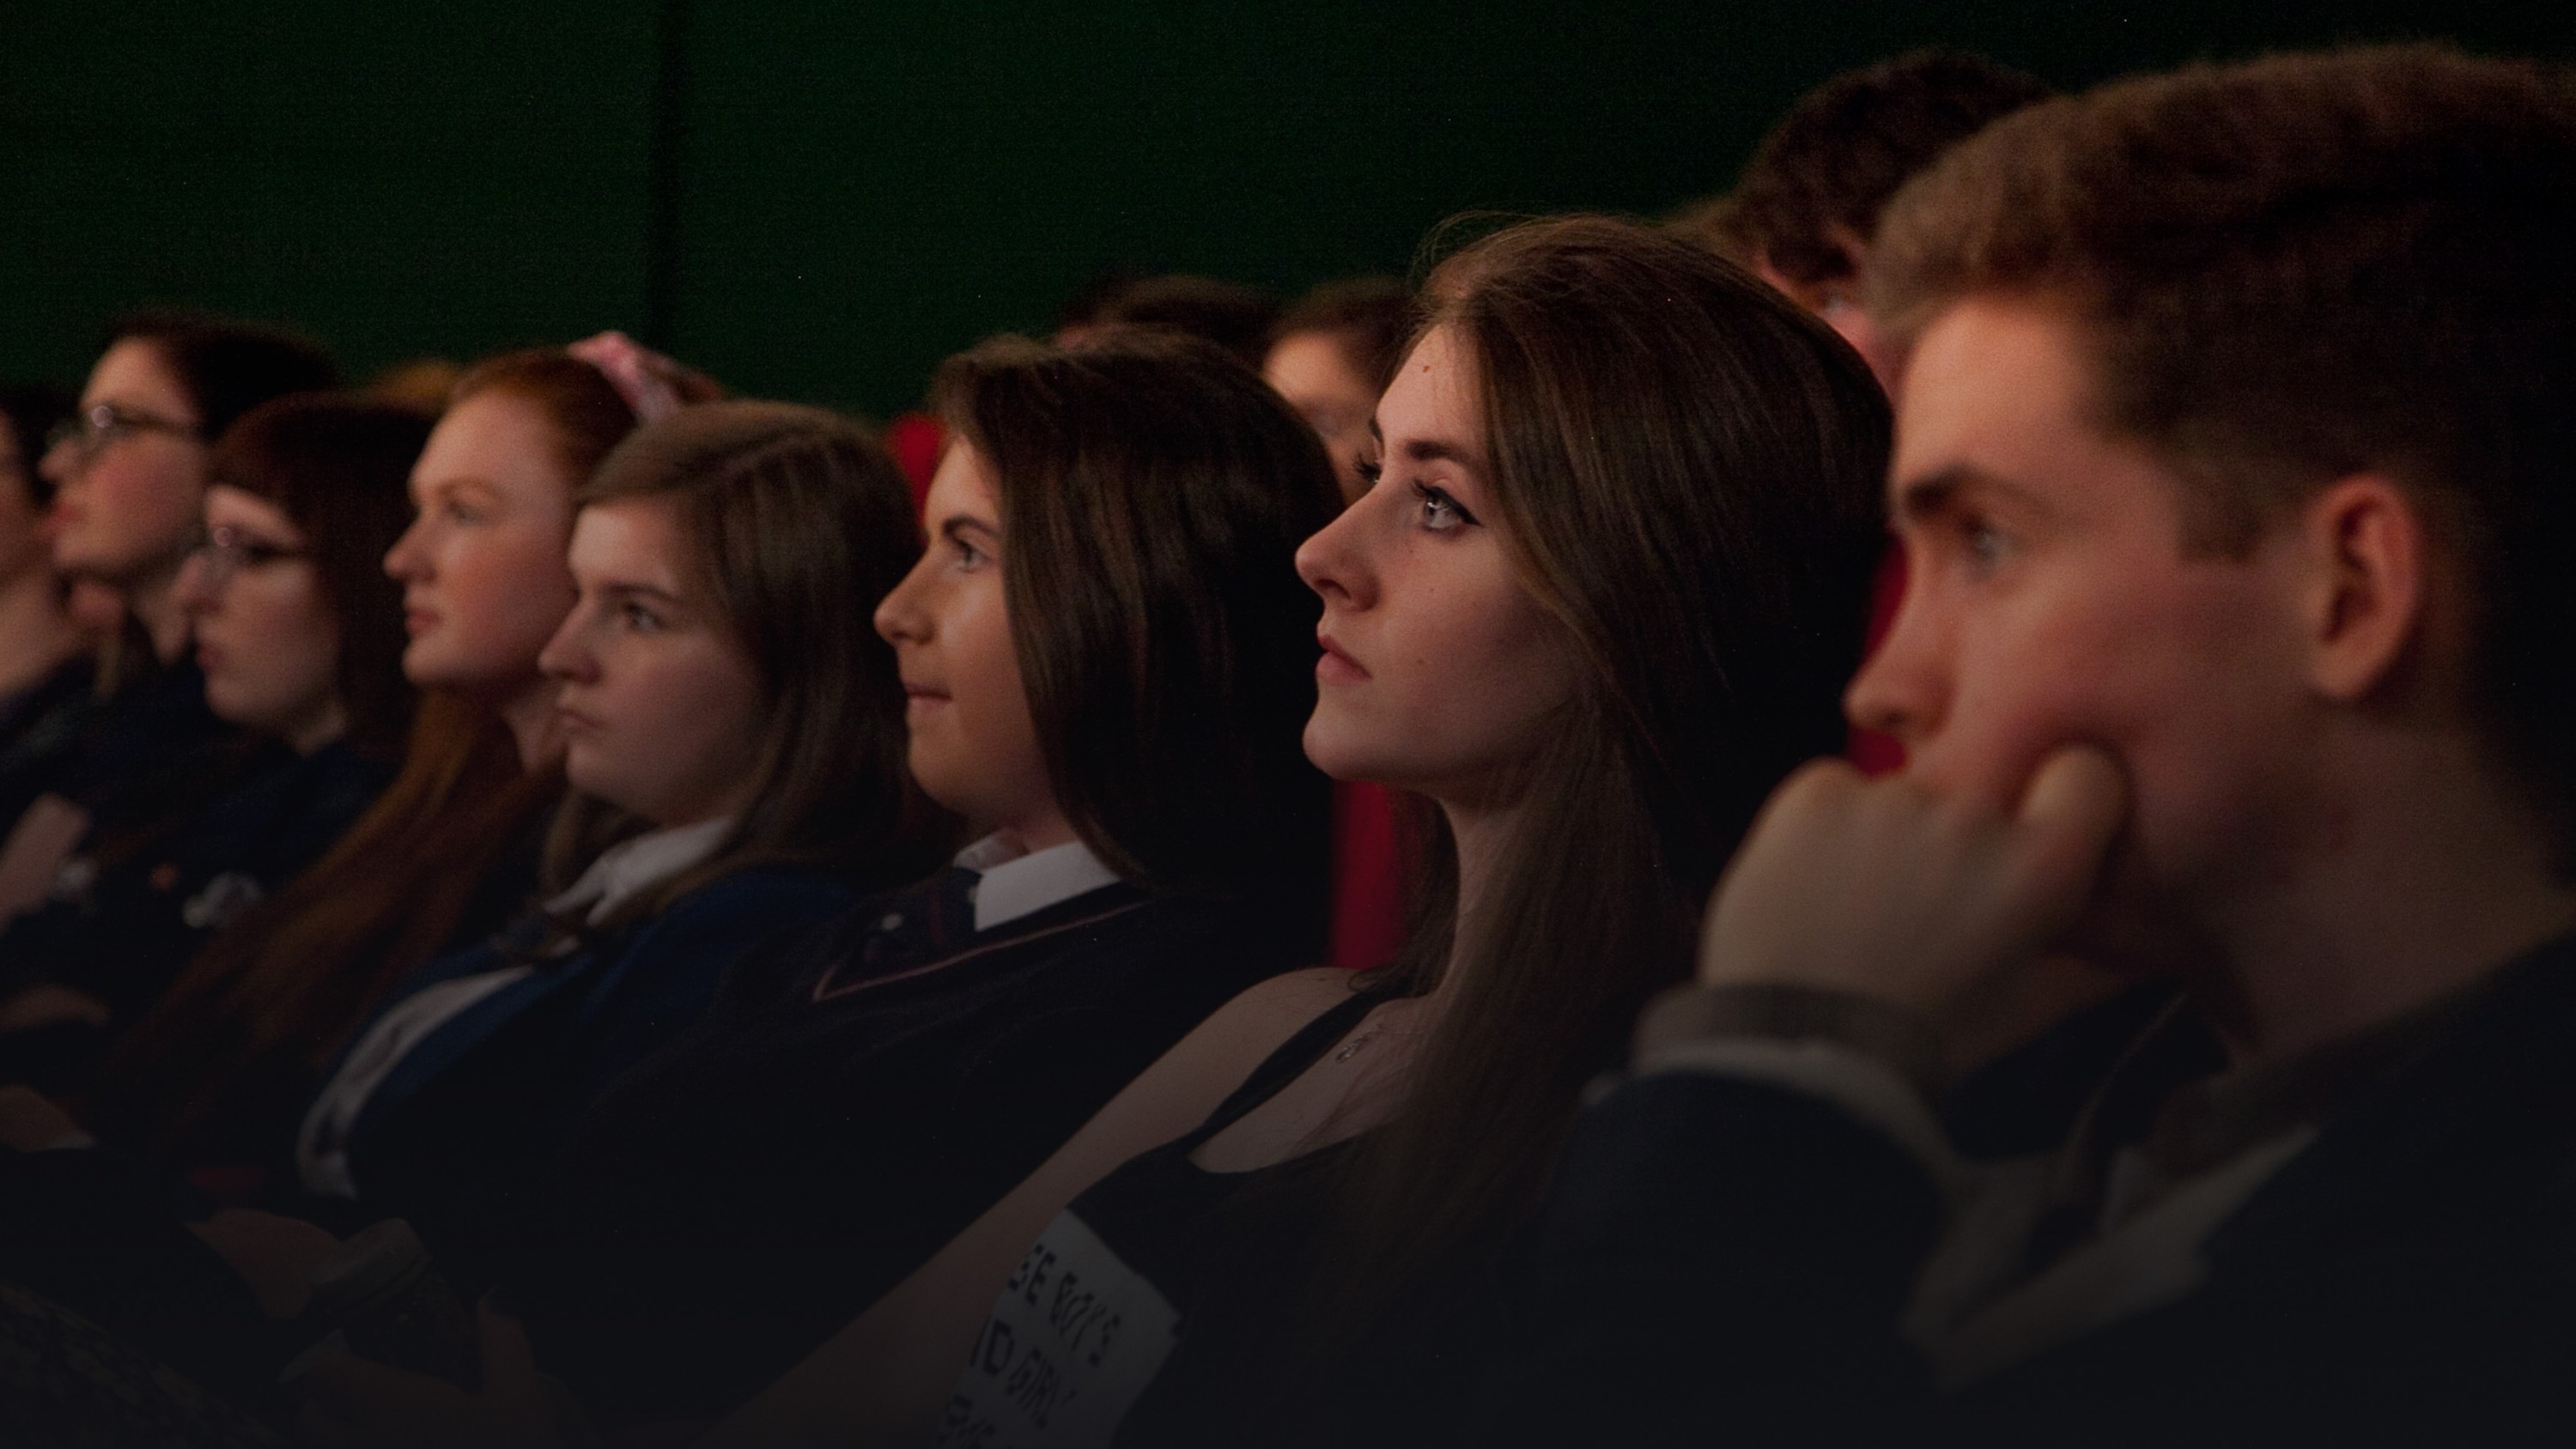 This resource helps young people to understand the range of roles in cinema